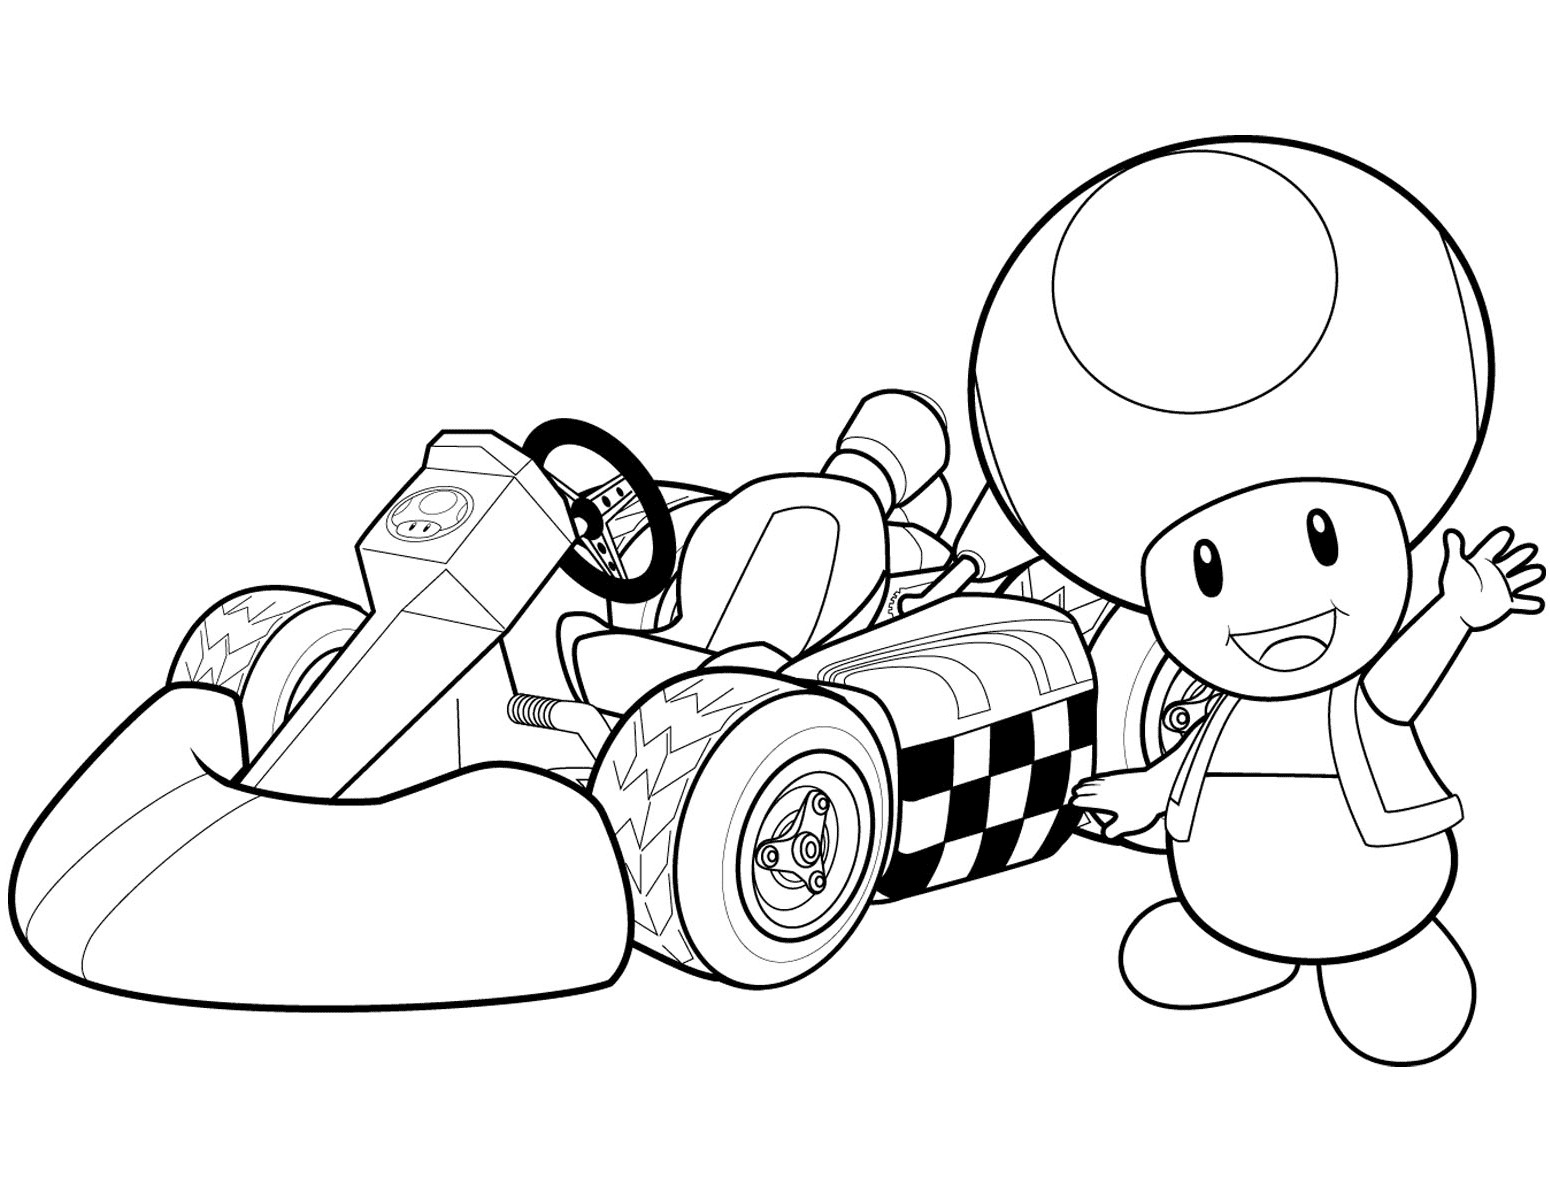 Toad and his racing car in Mario Kart Wii Coloring Page